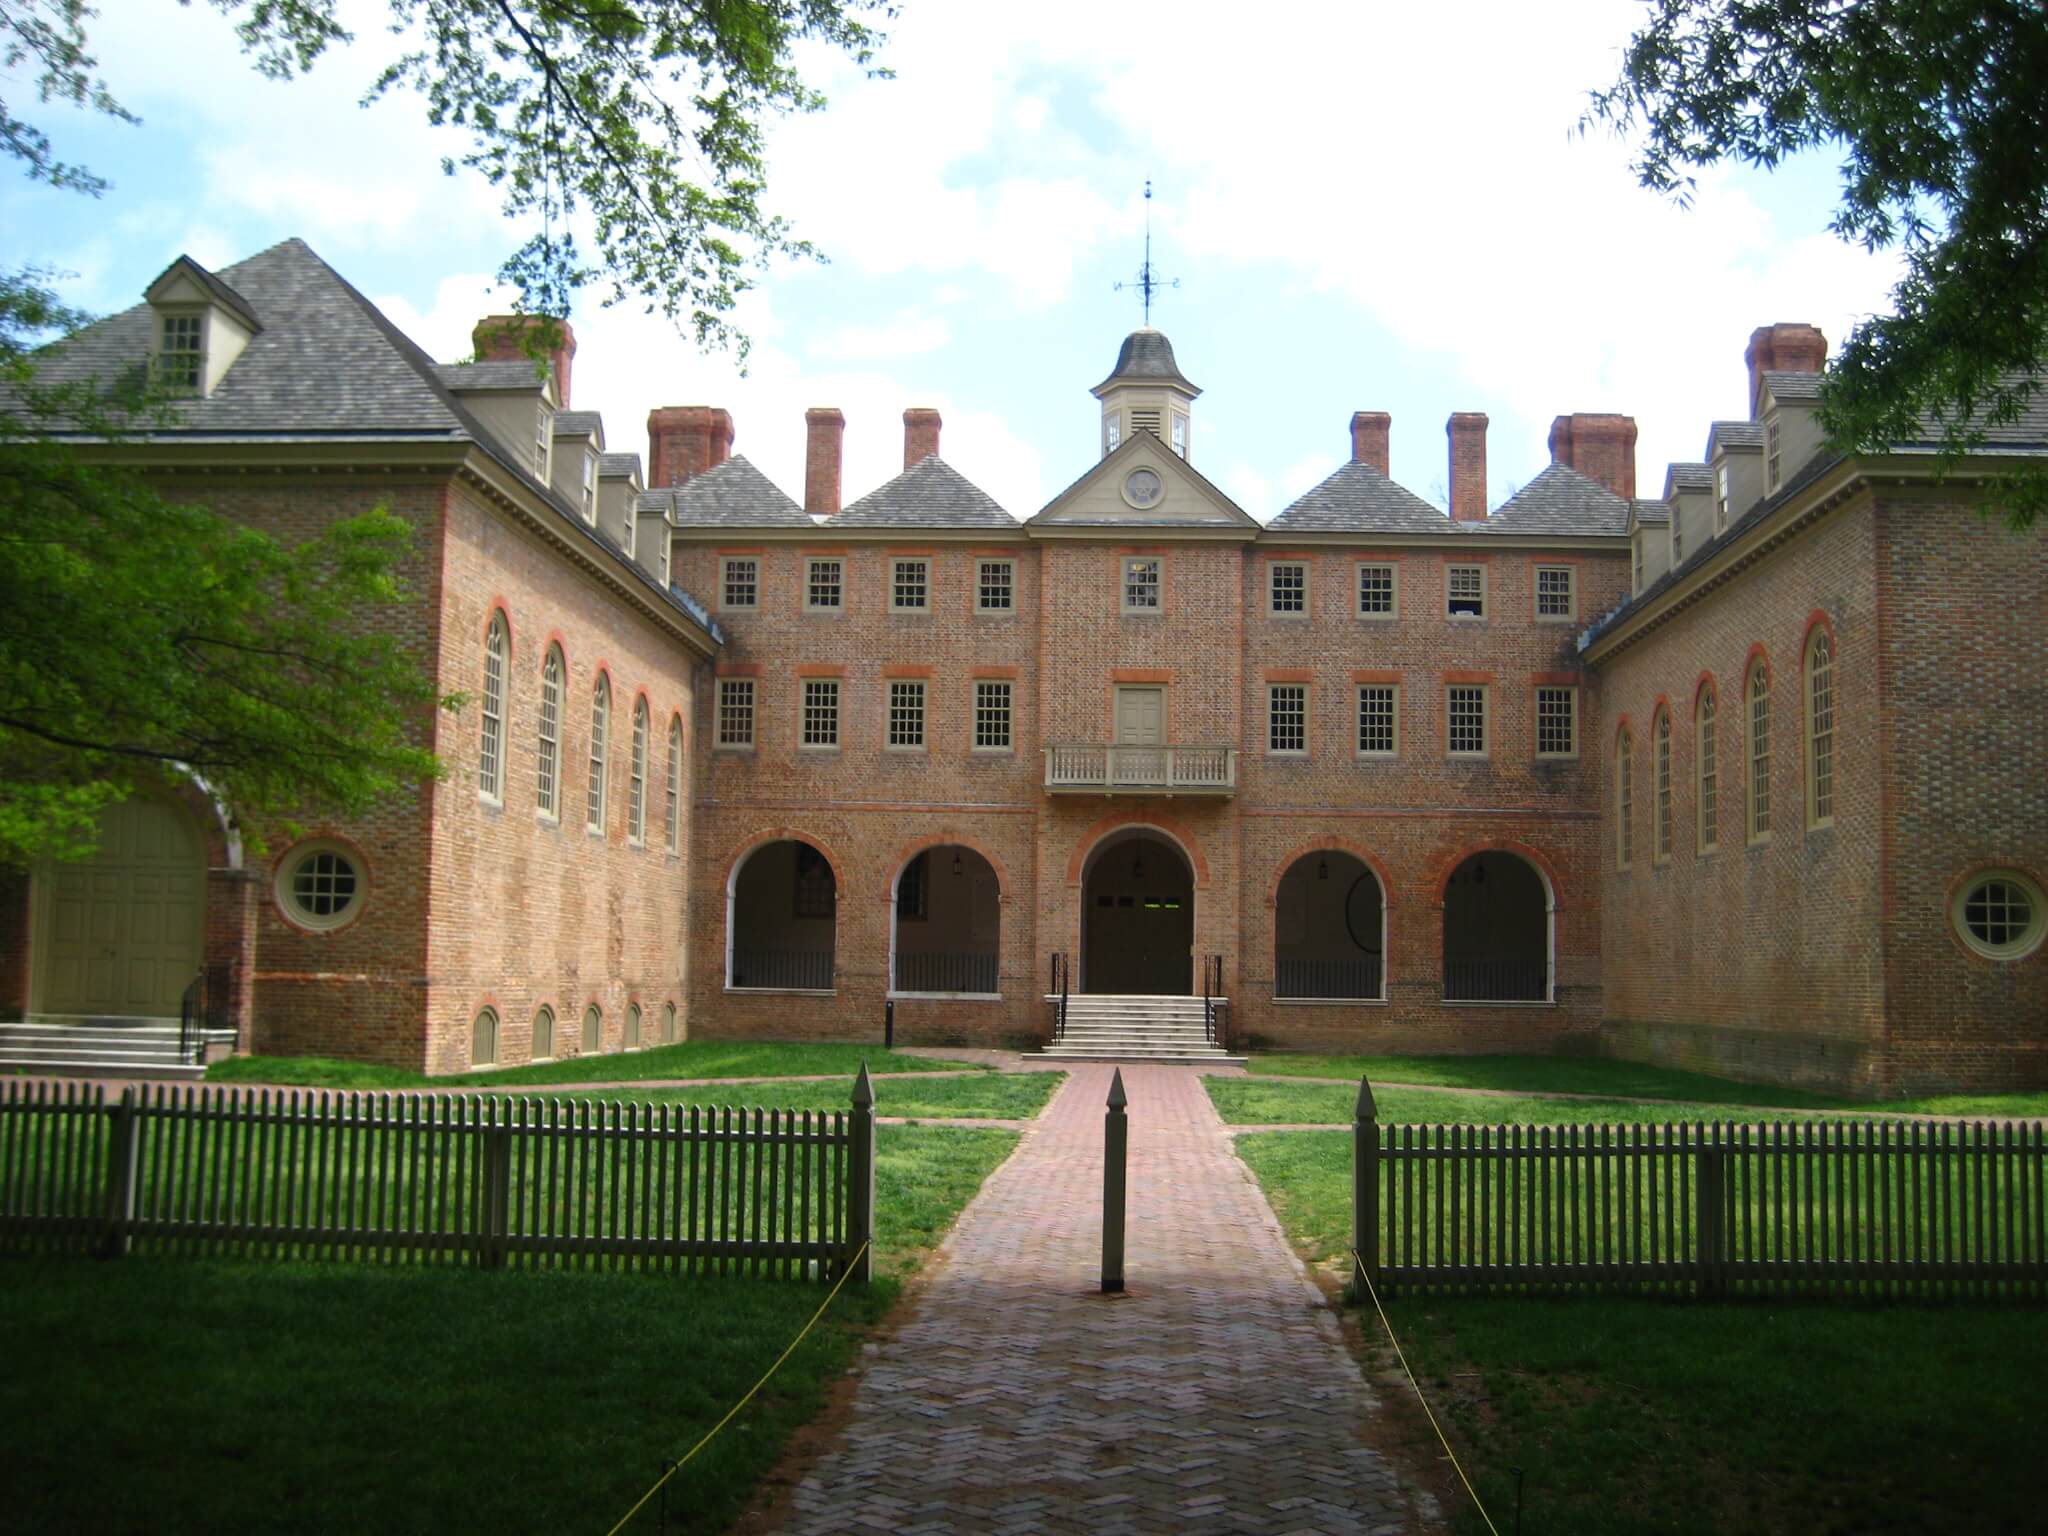 Can i get into college of william and mary? | yahoo answers